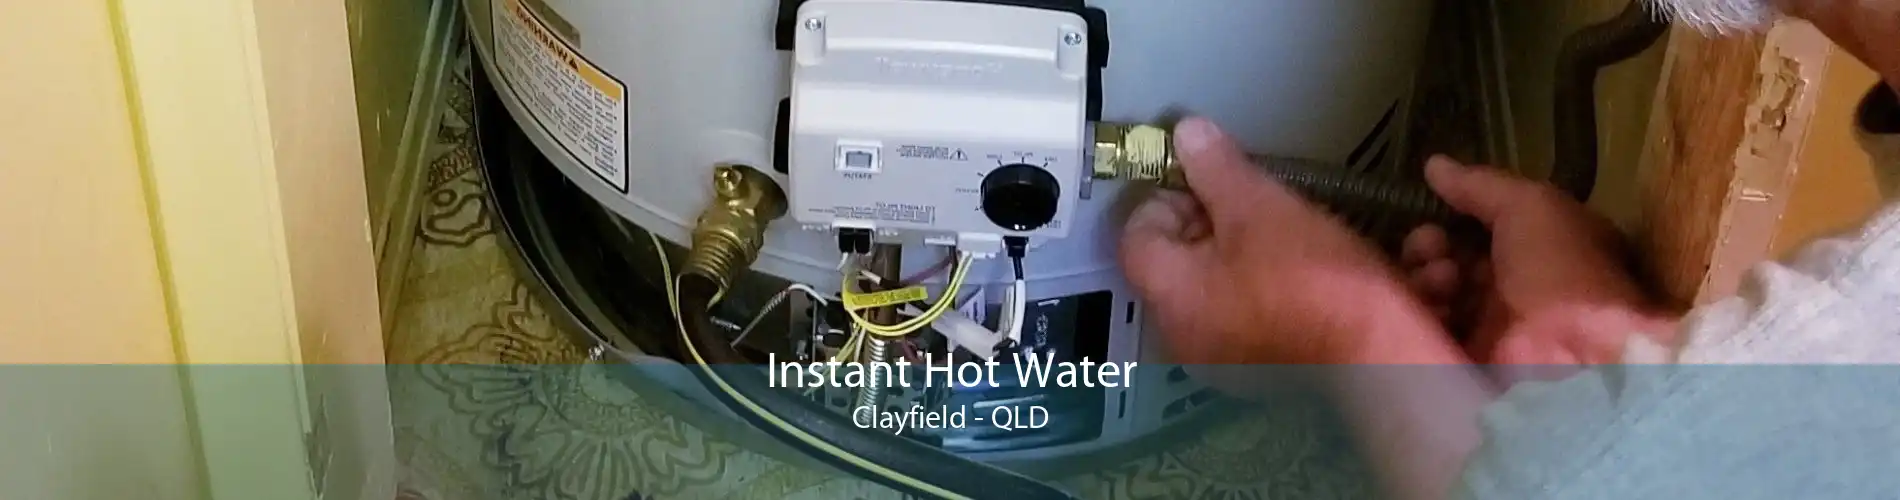 Instant Hot Water Clayfield - QLD